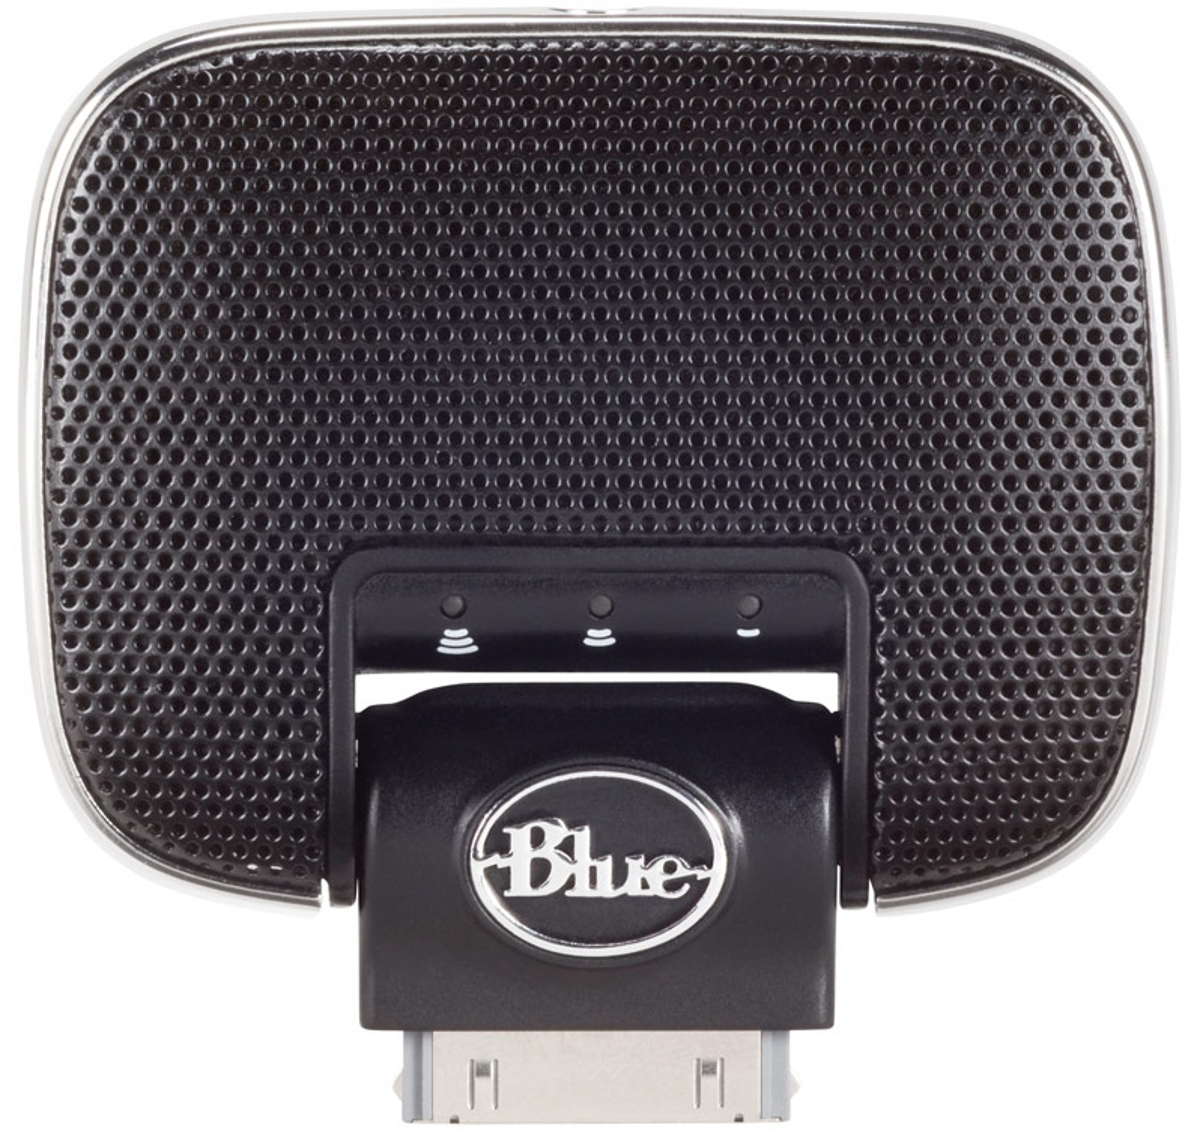 Photo of the second-generation Mikey microphone from Blue Microphones.